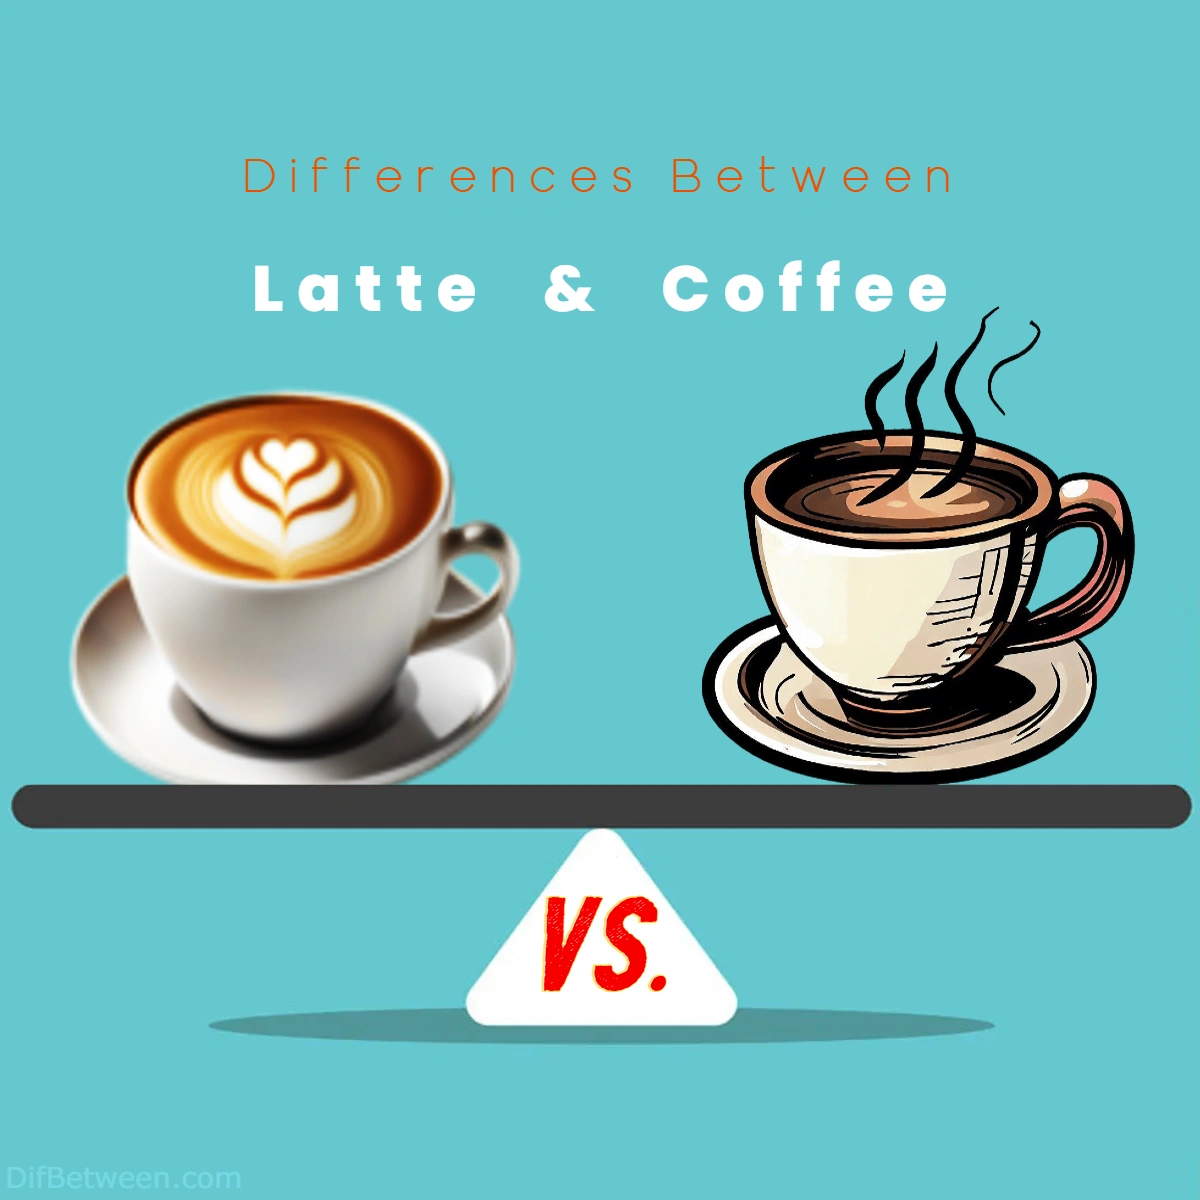 Difference Between Latte and Coffee